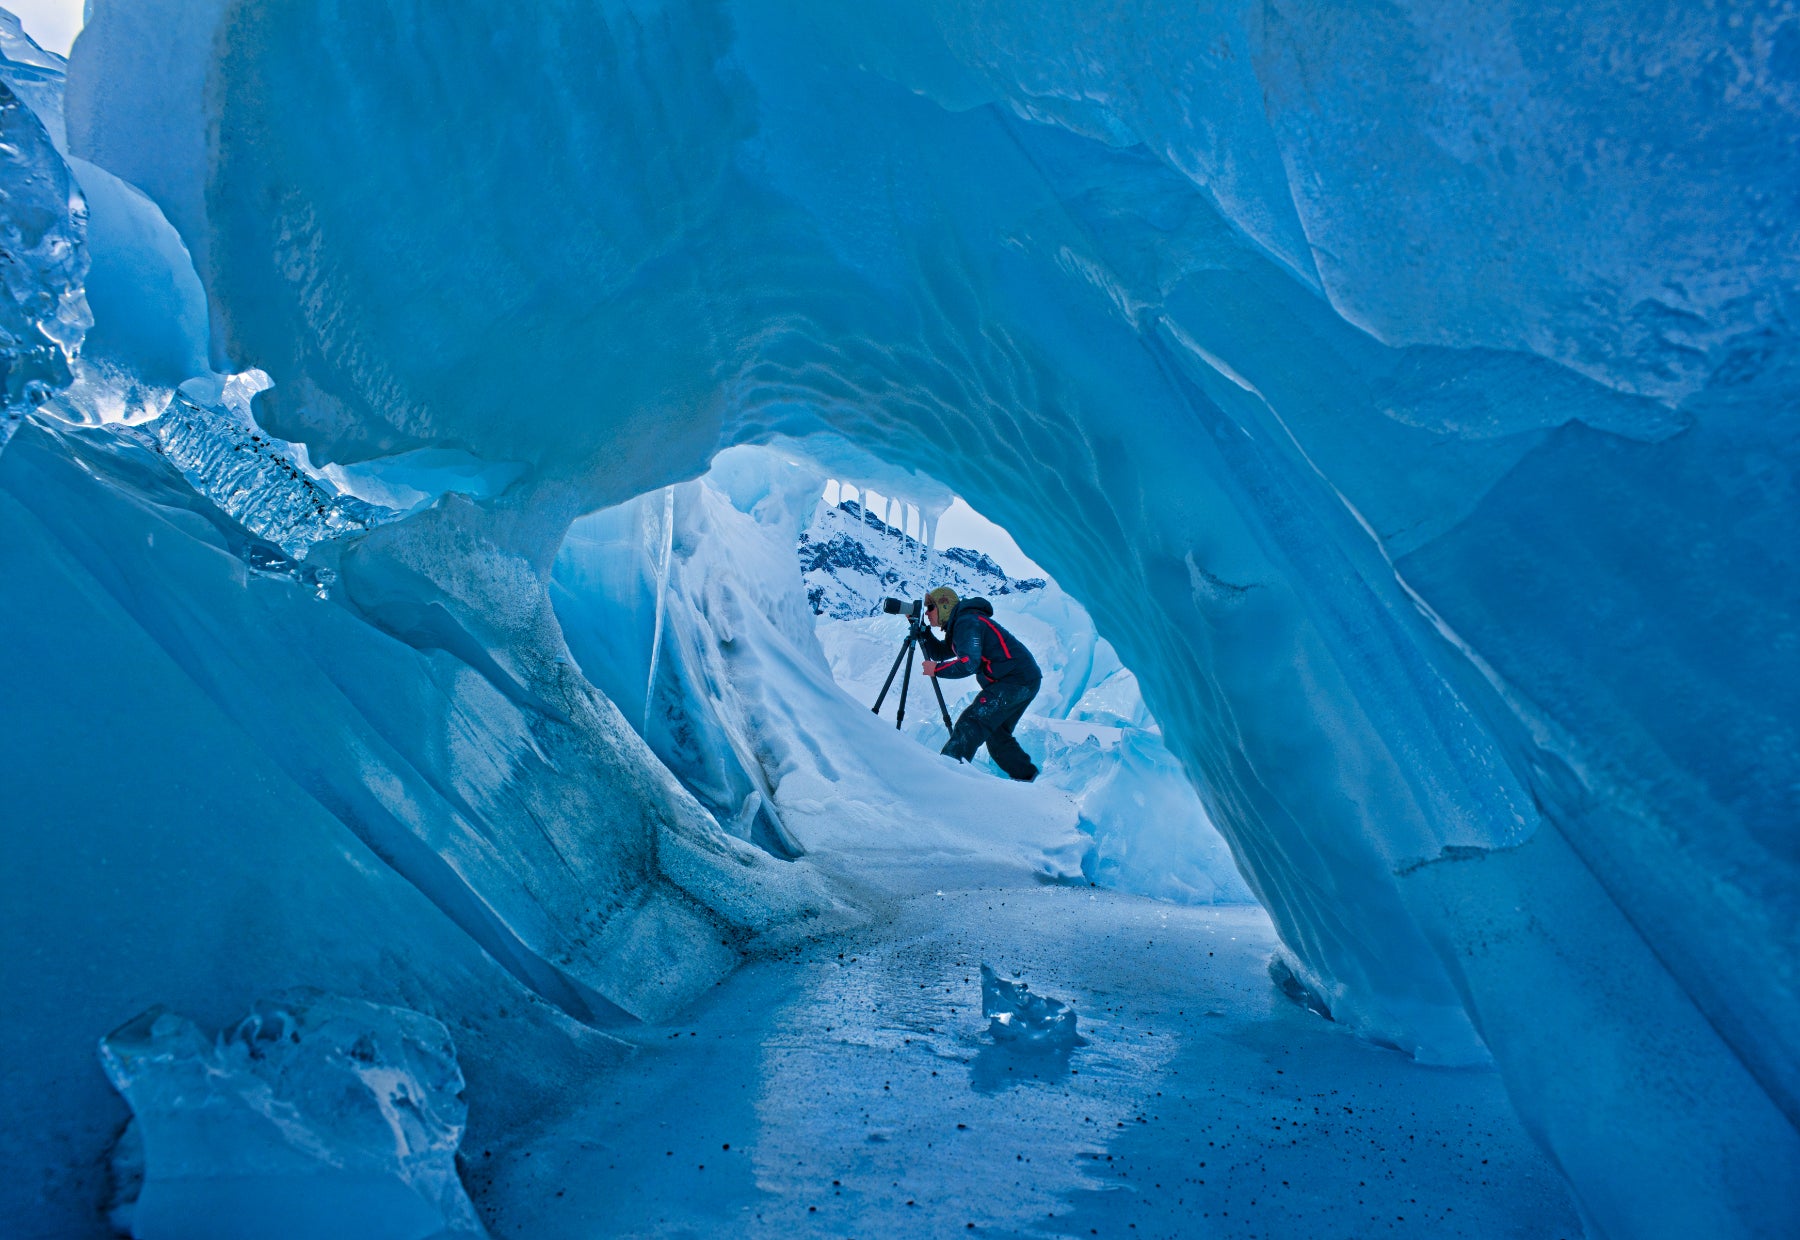 Portrait of Peter Lik looking through a camera from the view through a tunnel of bright blue ice in Alaska.